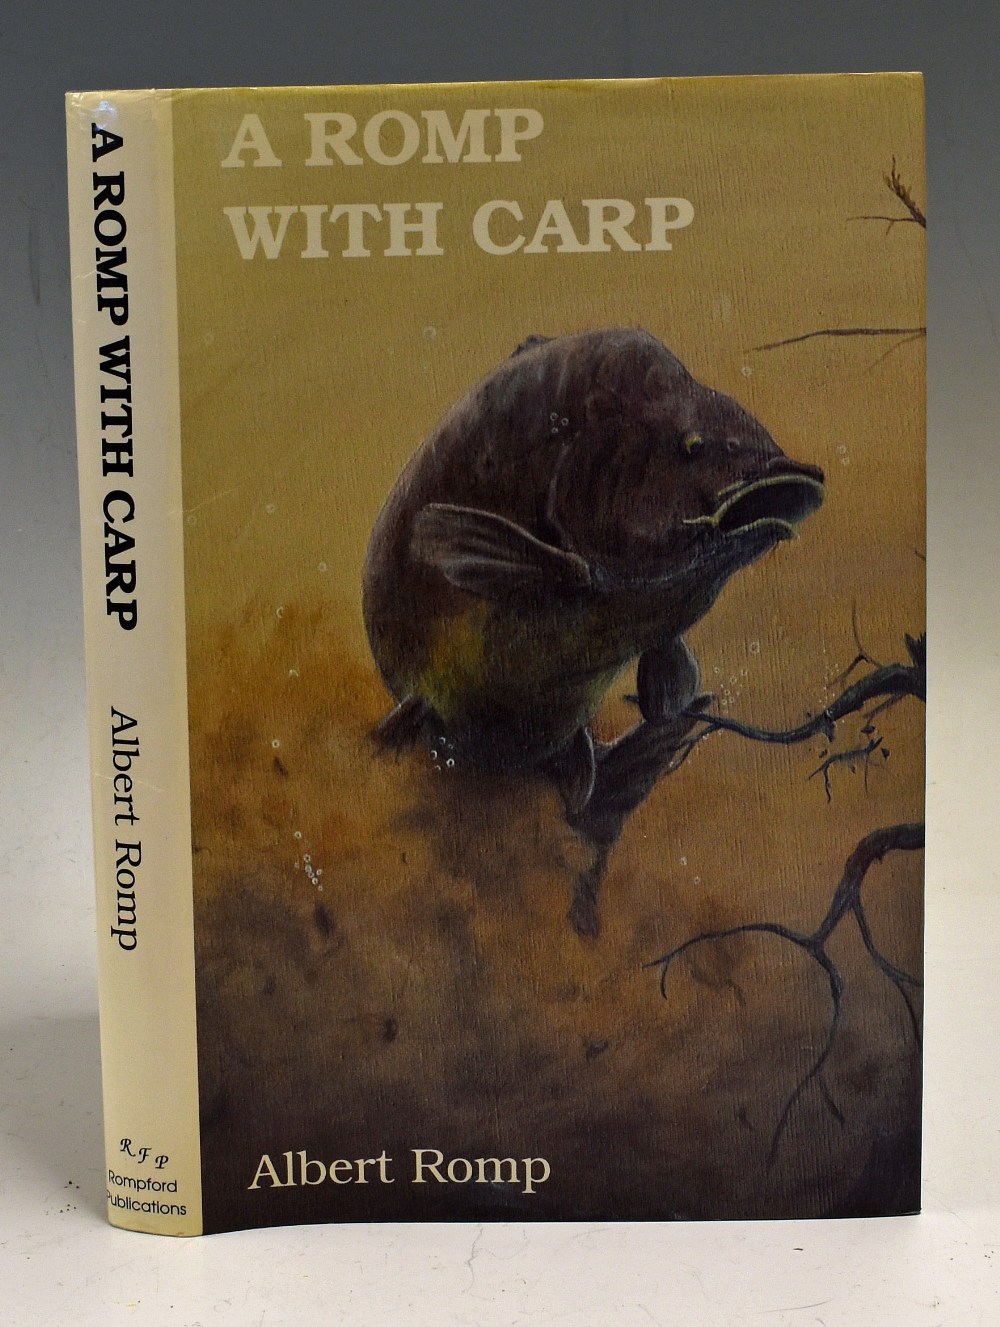 Romp, A - "A Romp With Carp" 1992, fine copy in dw.160pp. Rompford Publications.